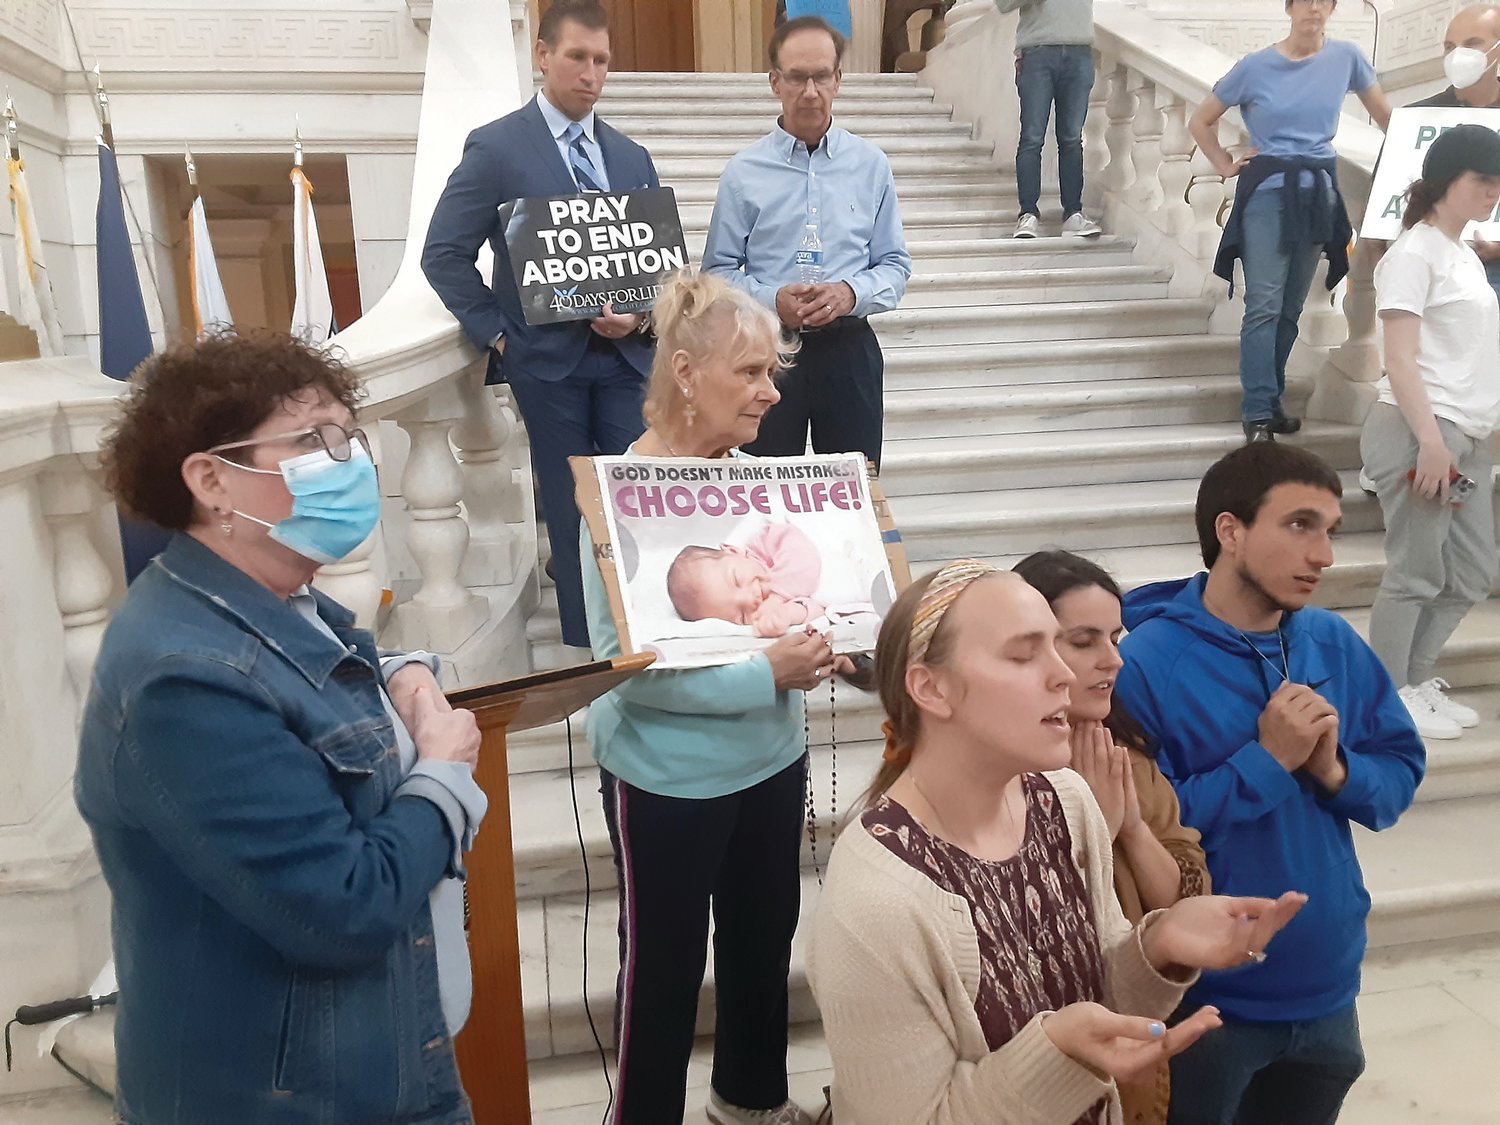 Pro-life supporters offer their prayers for the unborn on the main staircase inside the Statehouse while waiting for the House Finance Committee to begin hearing a bill that would use taxpayer funding to pay for abortions.